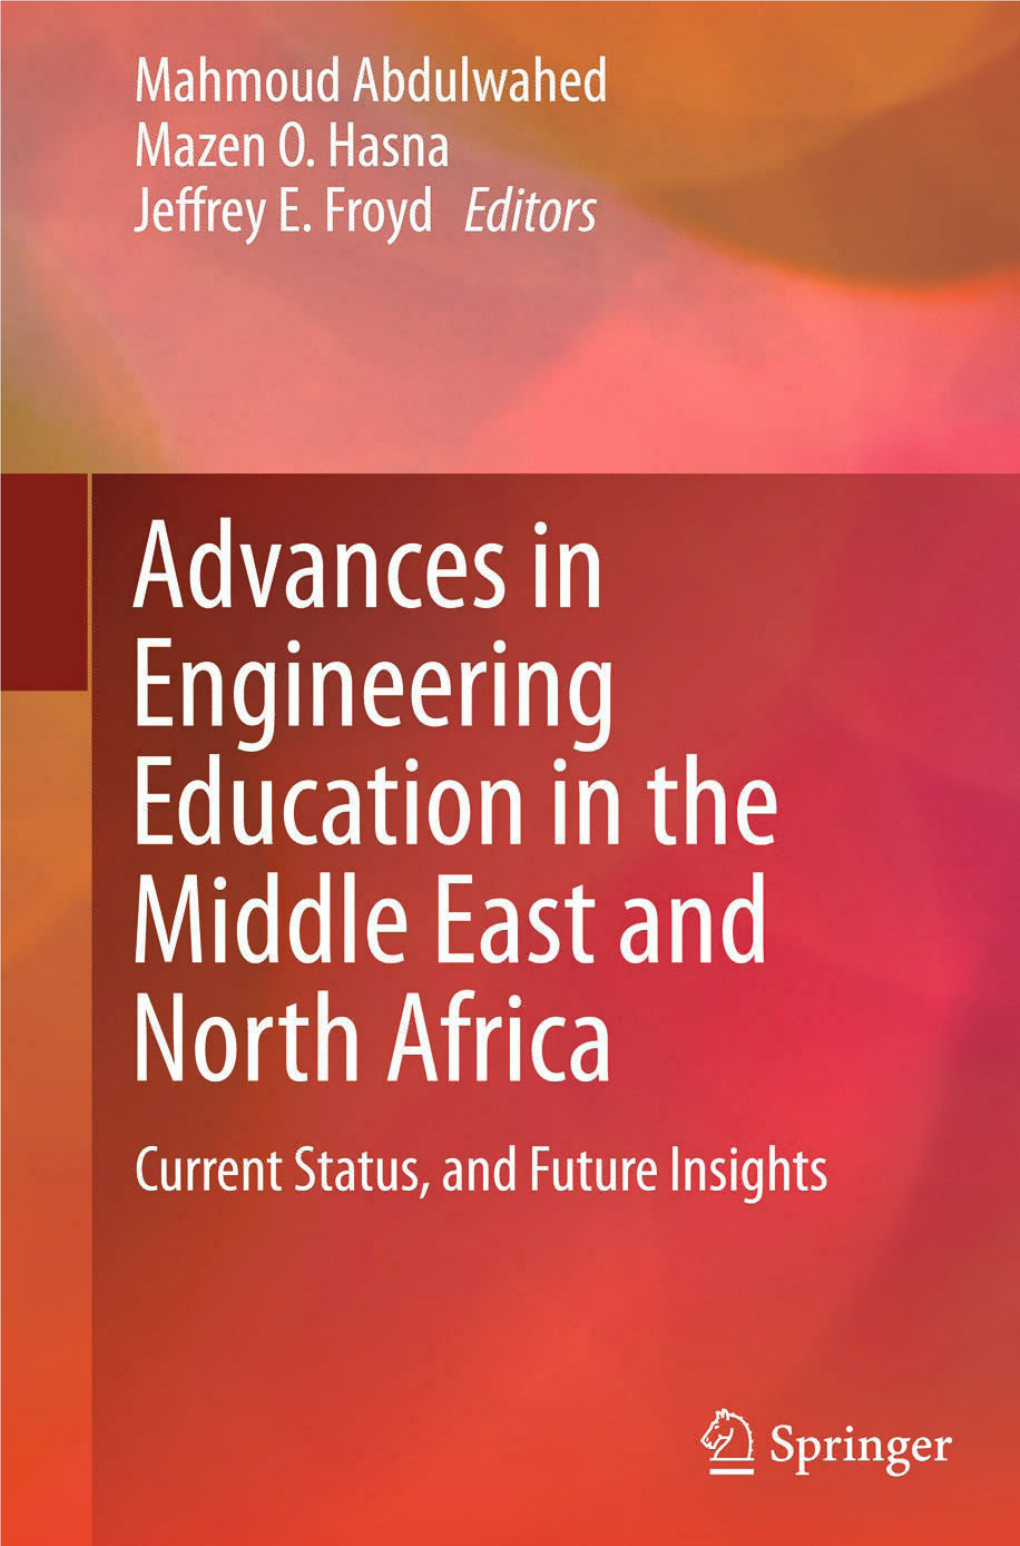 Part II Innovations in Learning, Teaching, and Engineering Education